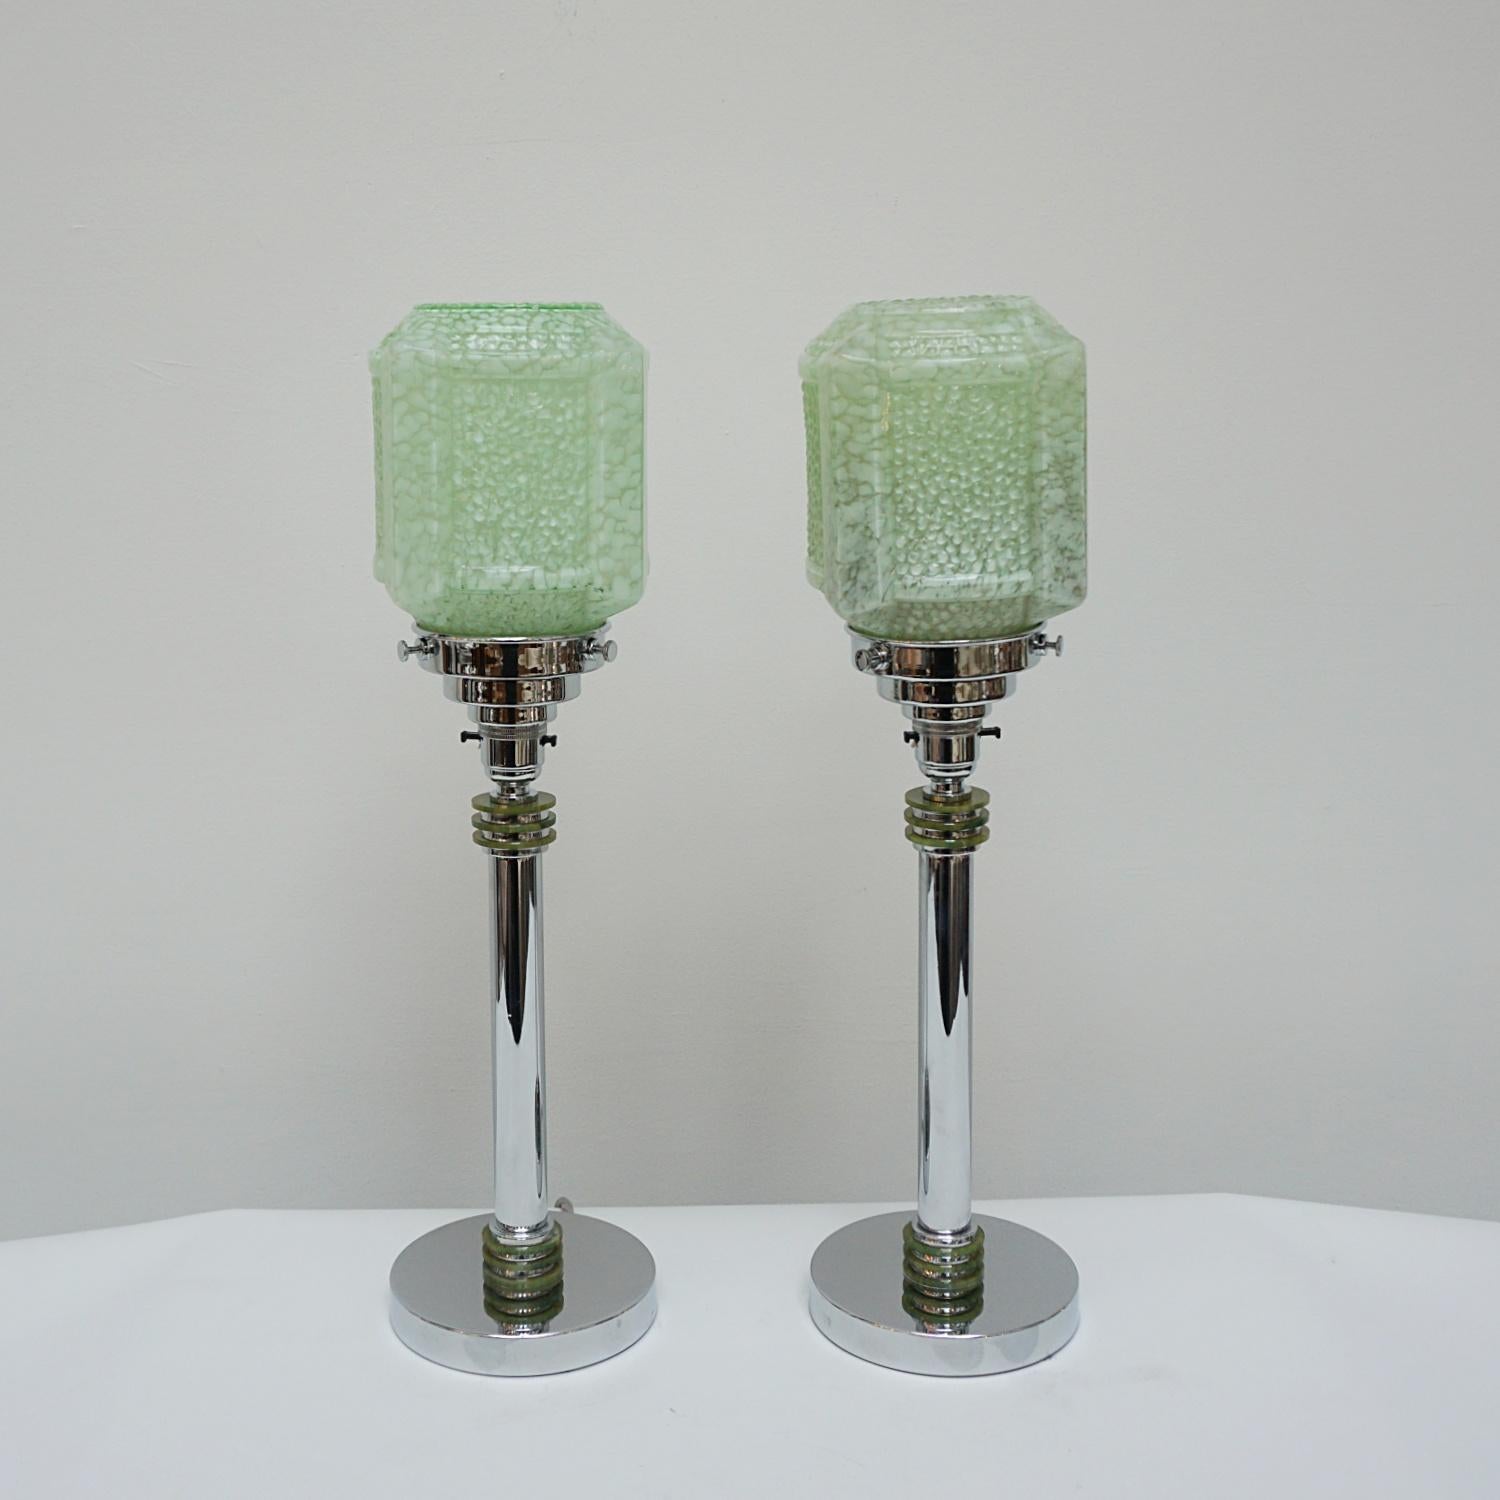 A pair of Art Deco table lamps. Chromed metal stem with discs of mottled green bakelite. Mottled green glass cubic shade, set over a chromed base.

Origin: English

All of our lighting is fully refurbished, re-wired, and re-chromed with some